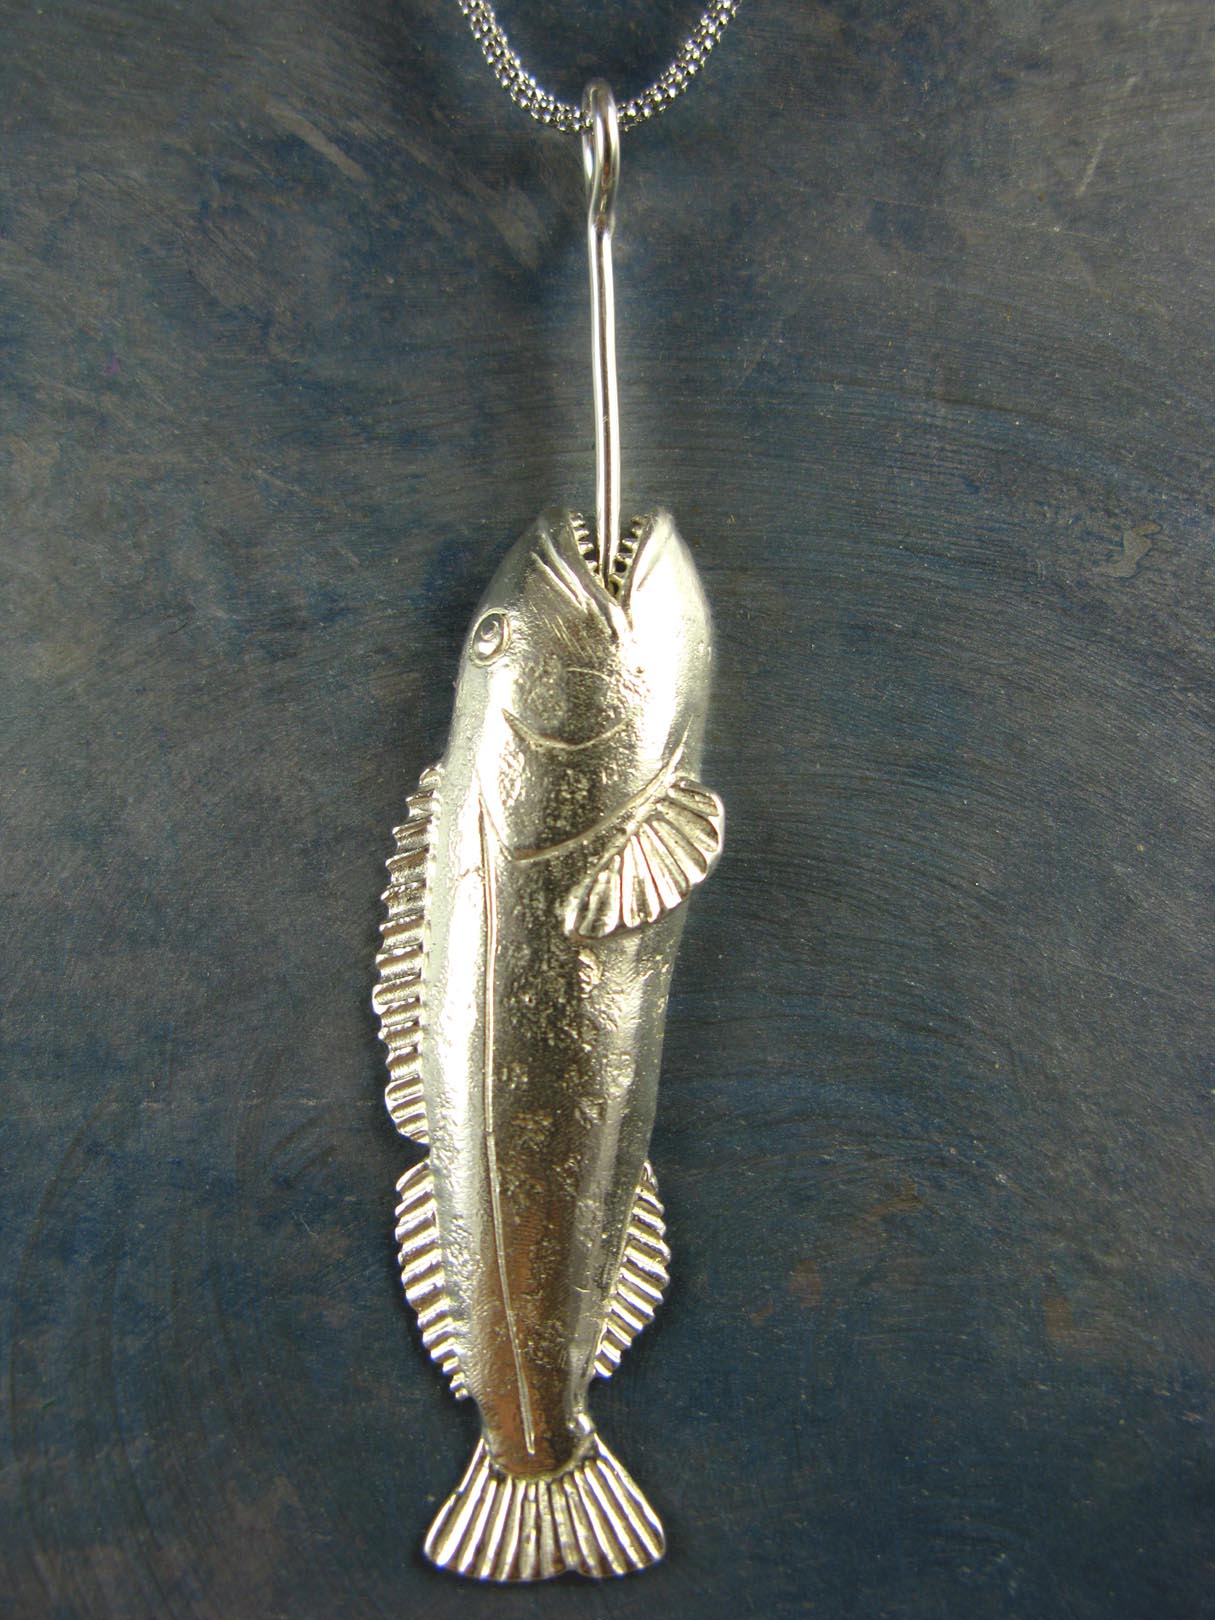 Large Ling Cod Pendant in Gold